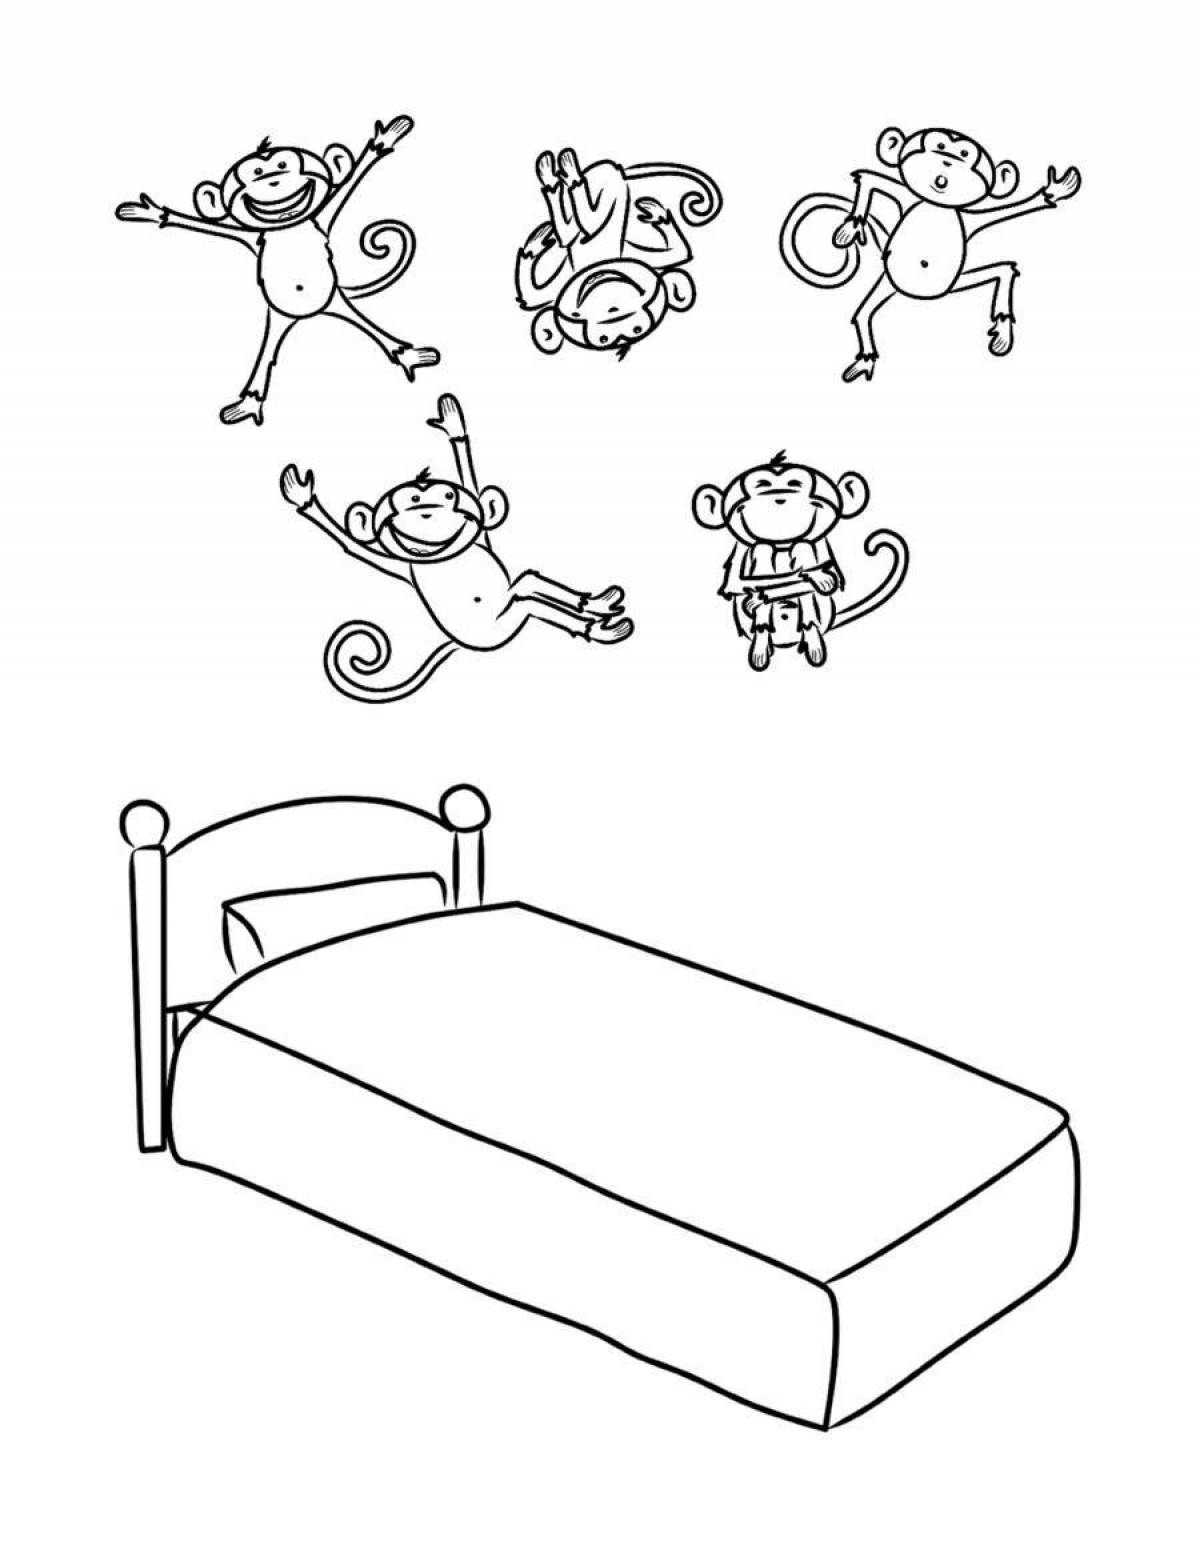 Awesome bed coloring page for kids